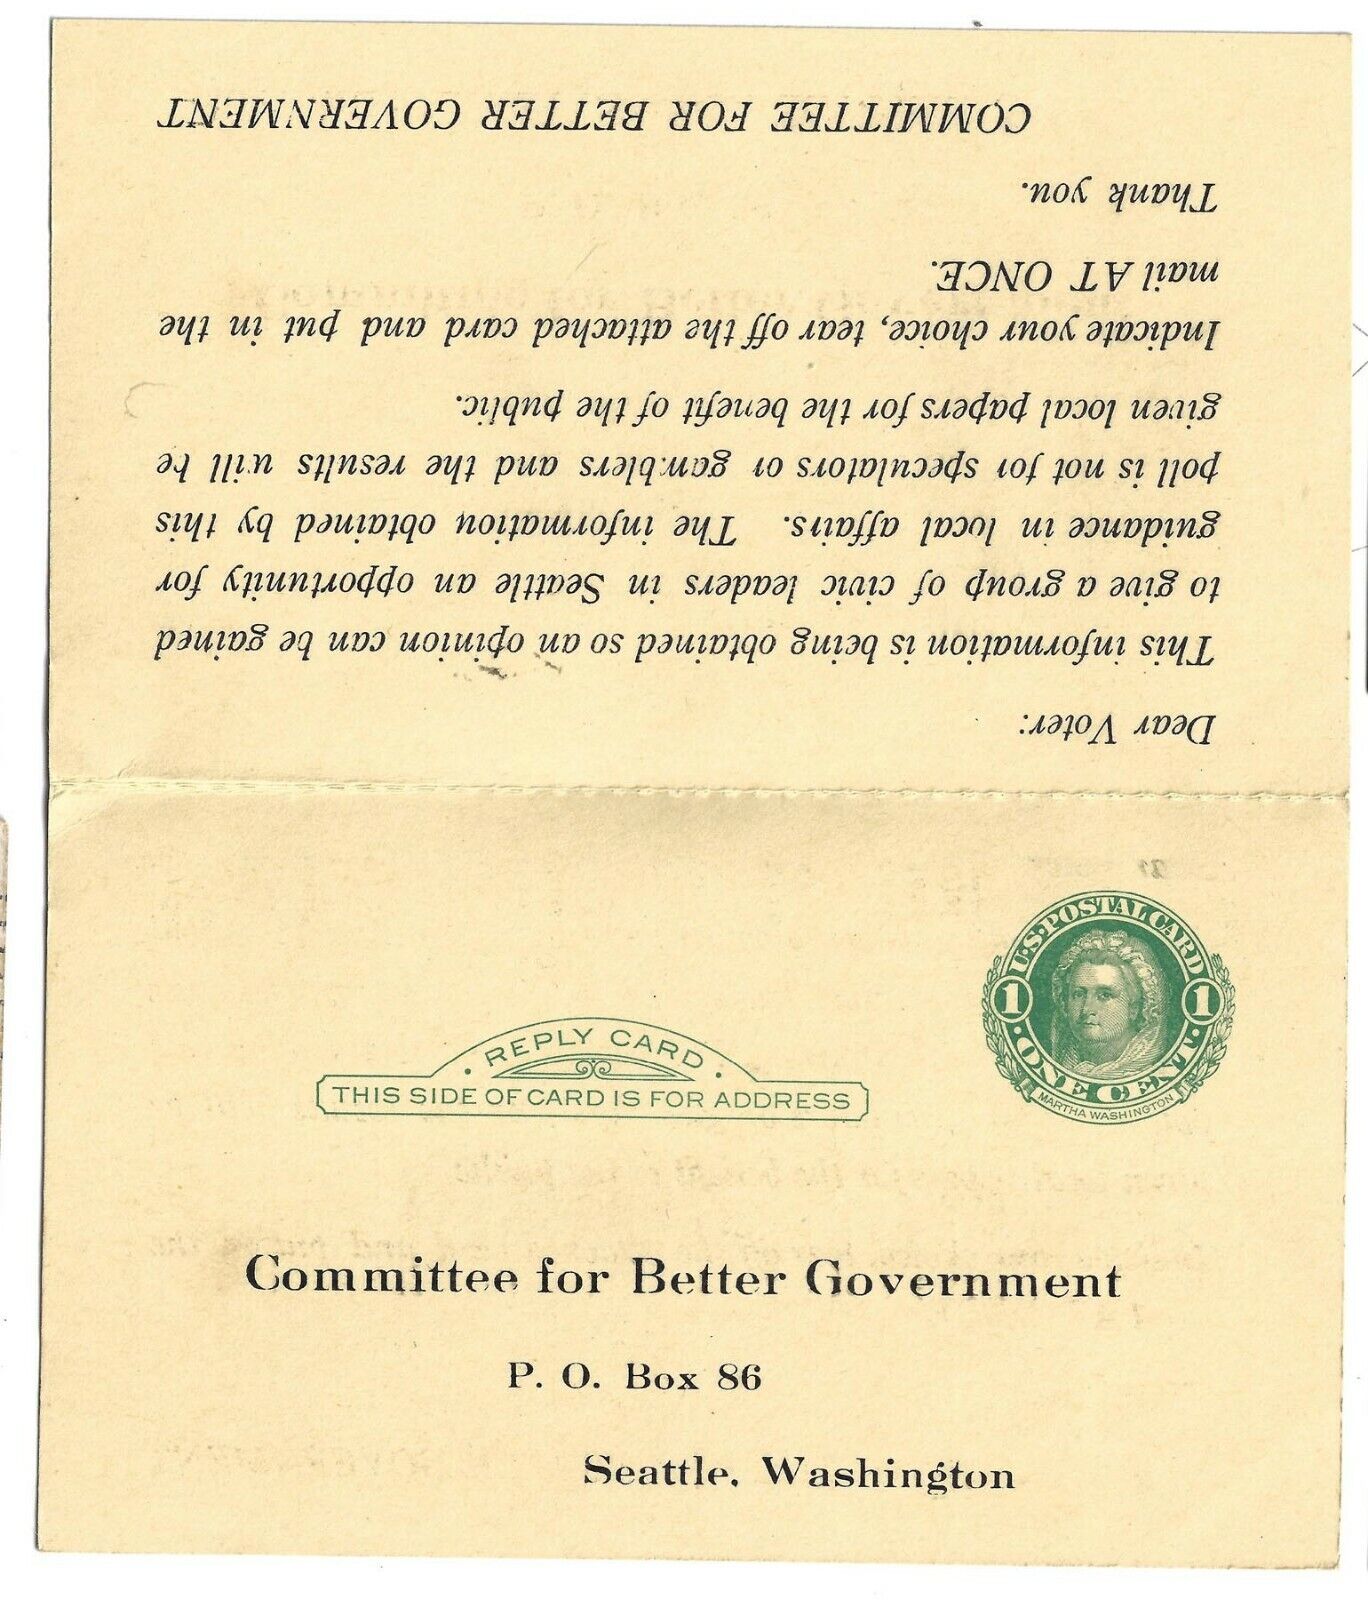 1942 Seattle WA Committee 4 Better Govt Folding Poll Postcard Candidates Issues